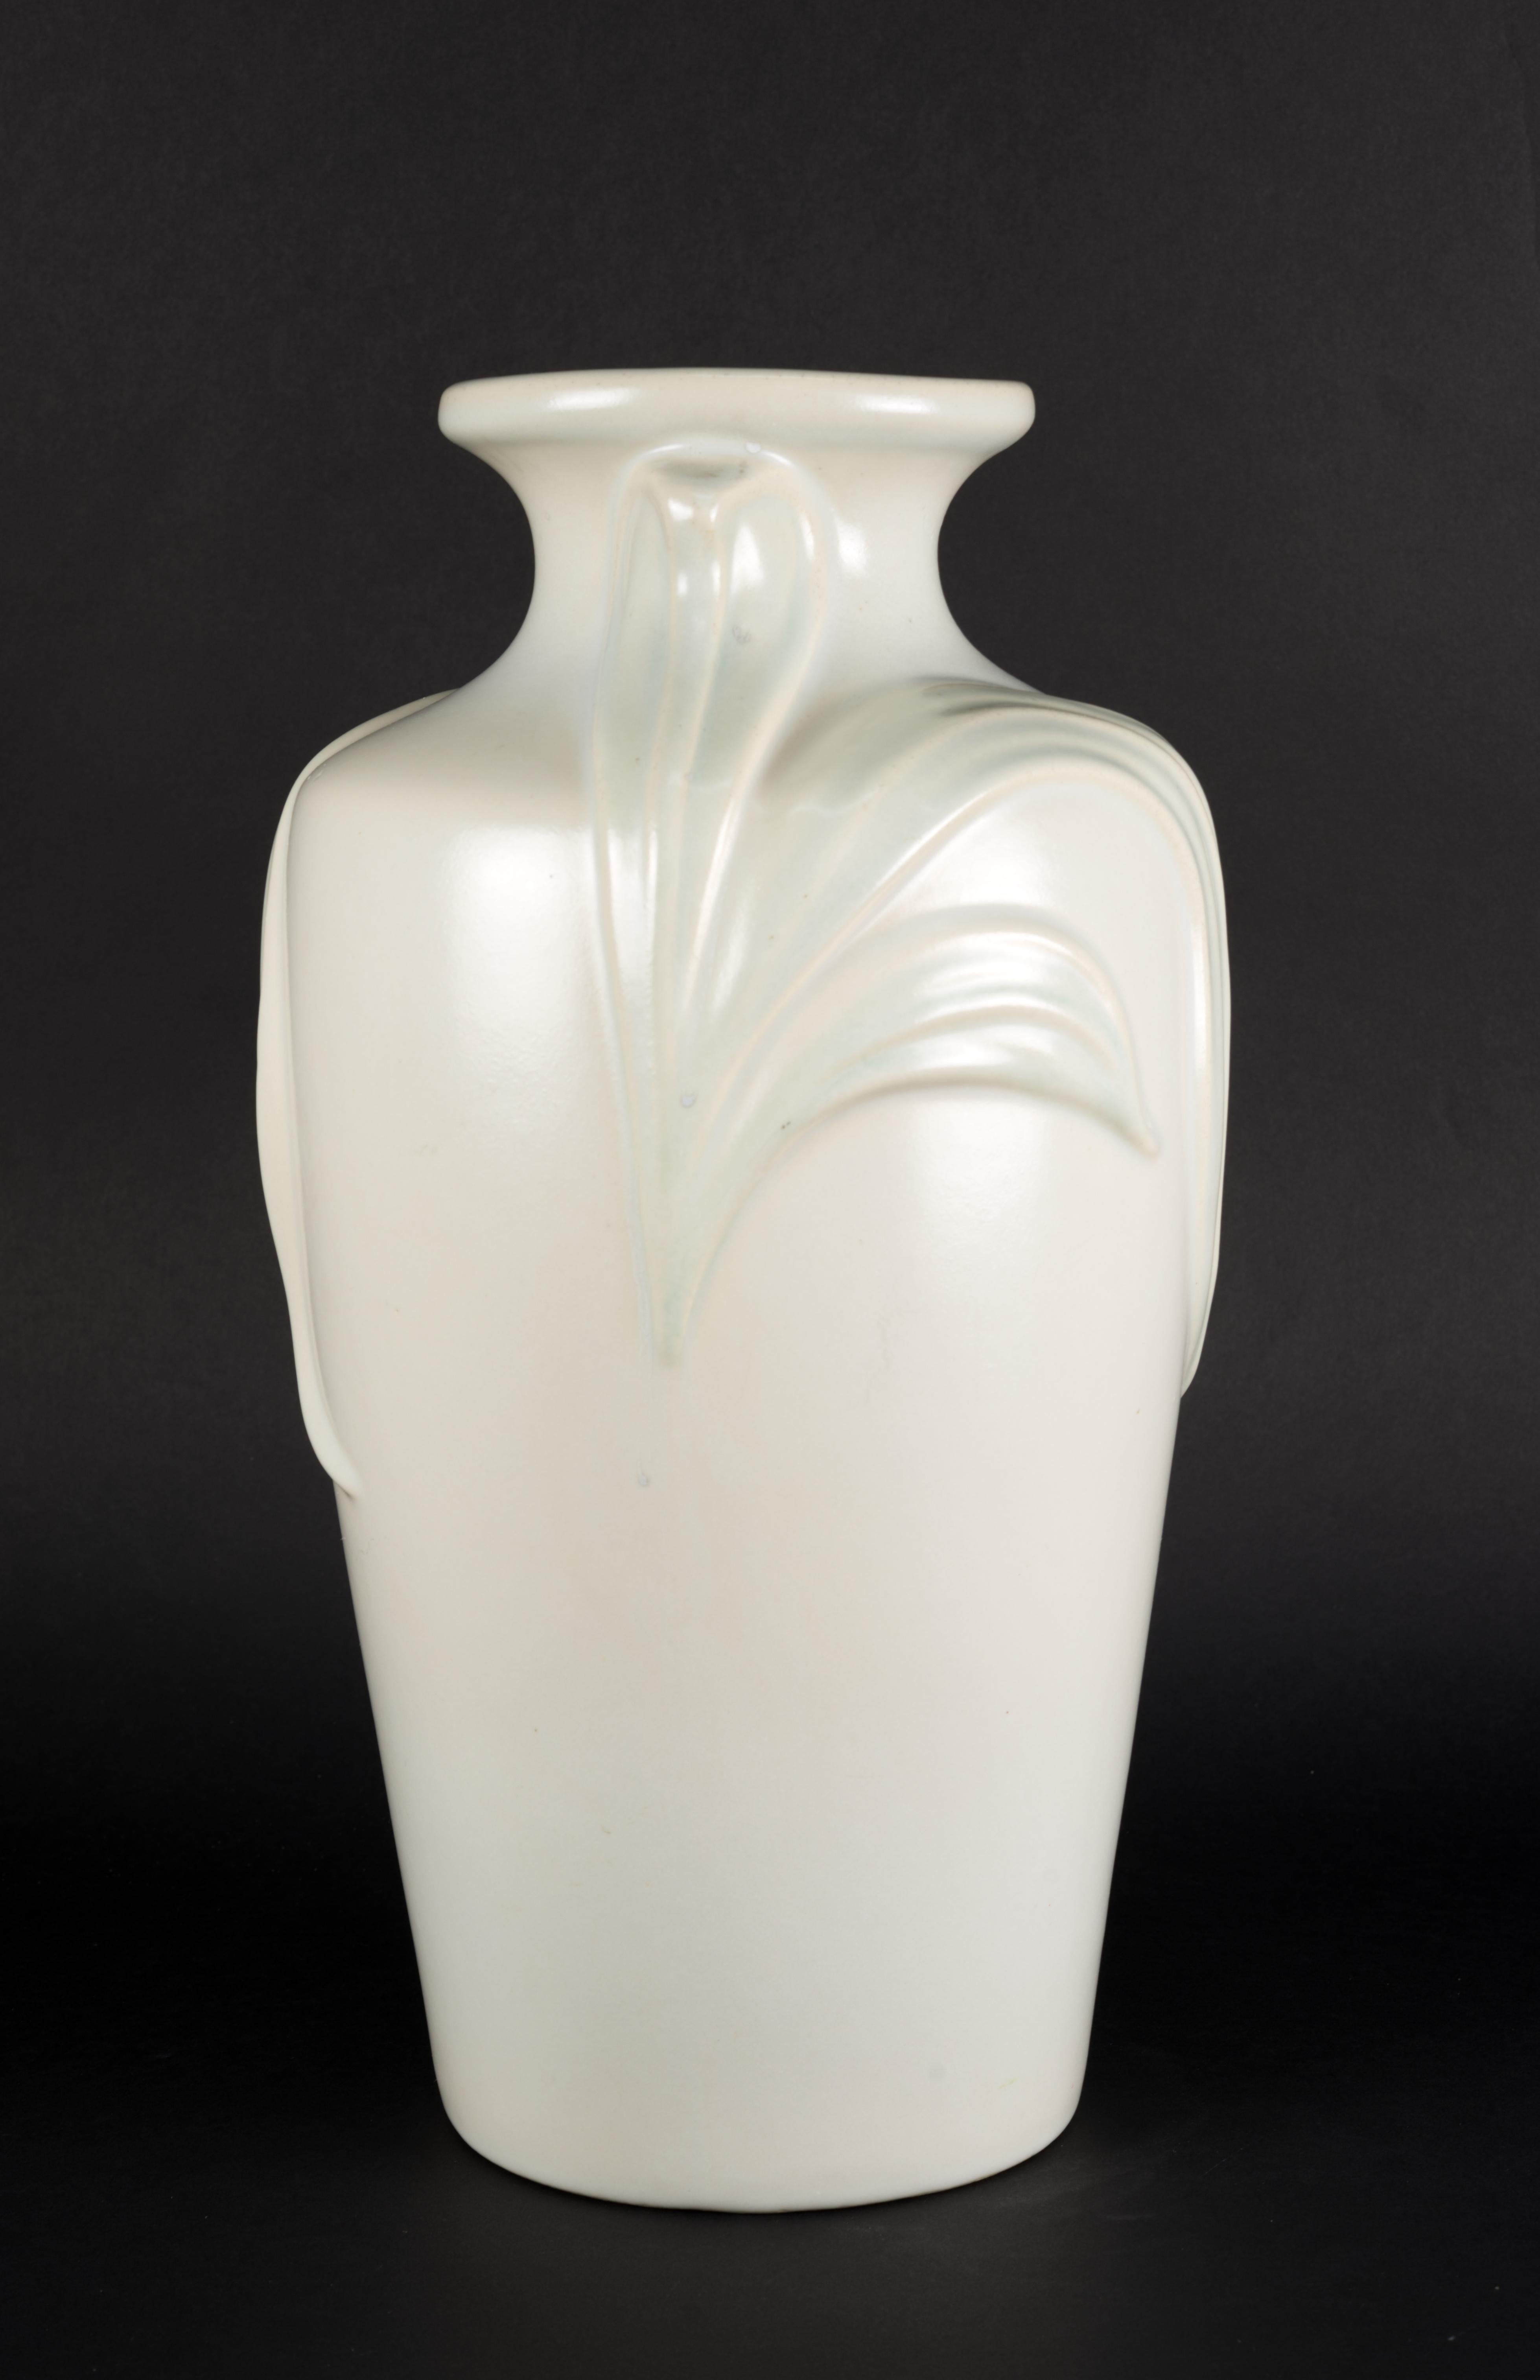 American Art Deco Revival Large Light Blue Off-White Vase, Relief of Leaves, 1980s For Sale